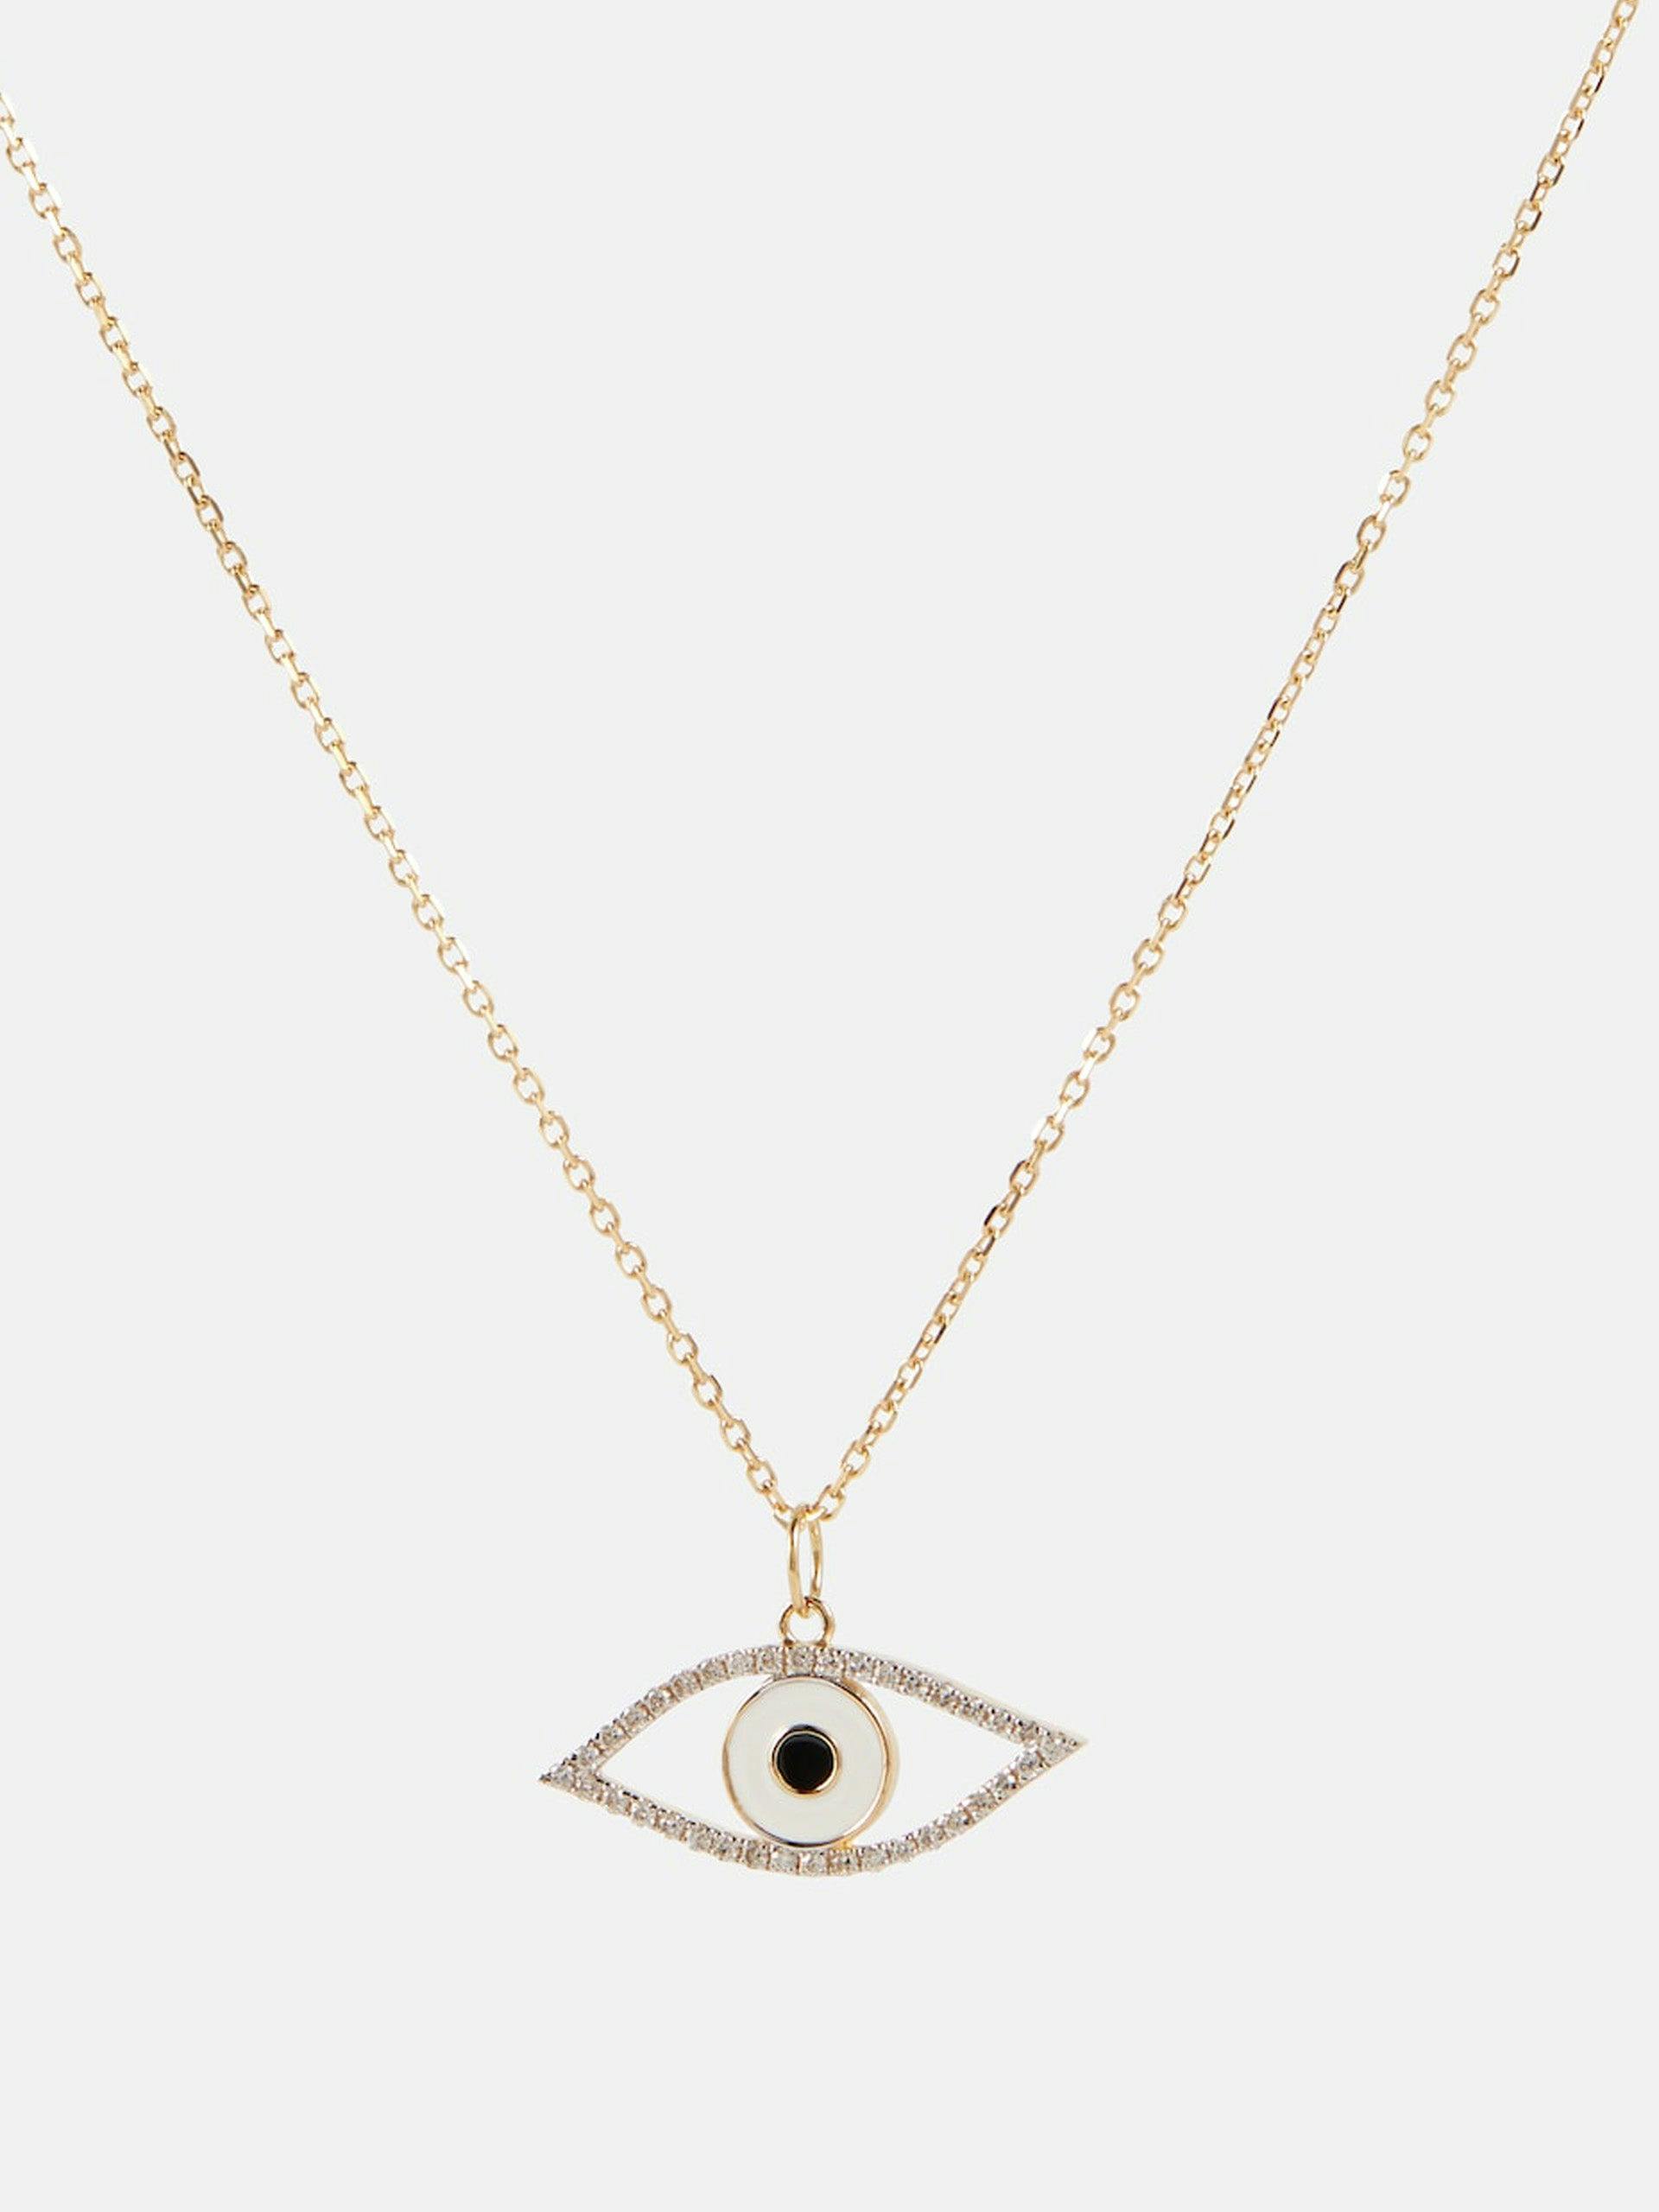 Eye of Protection 14kt gold necklace with diamonds